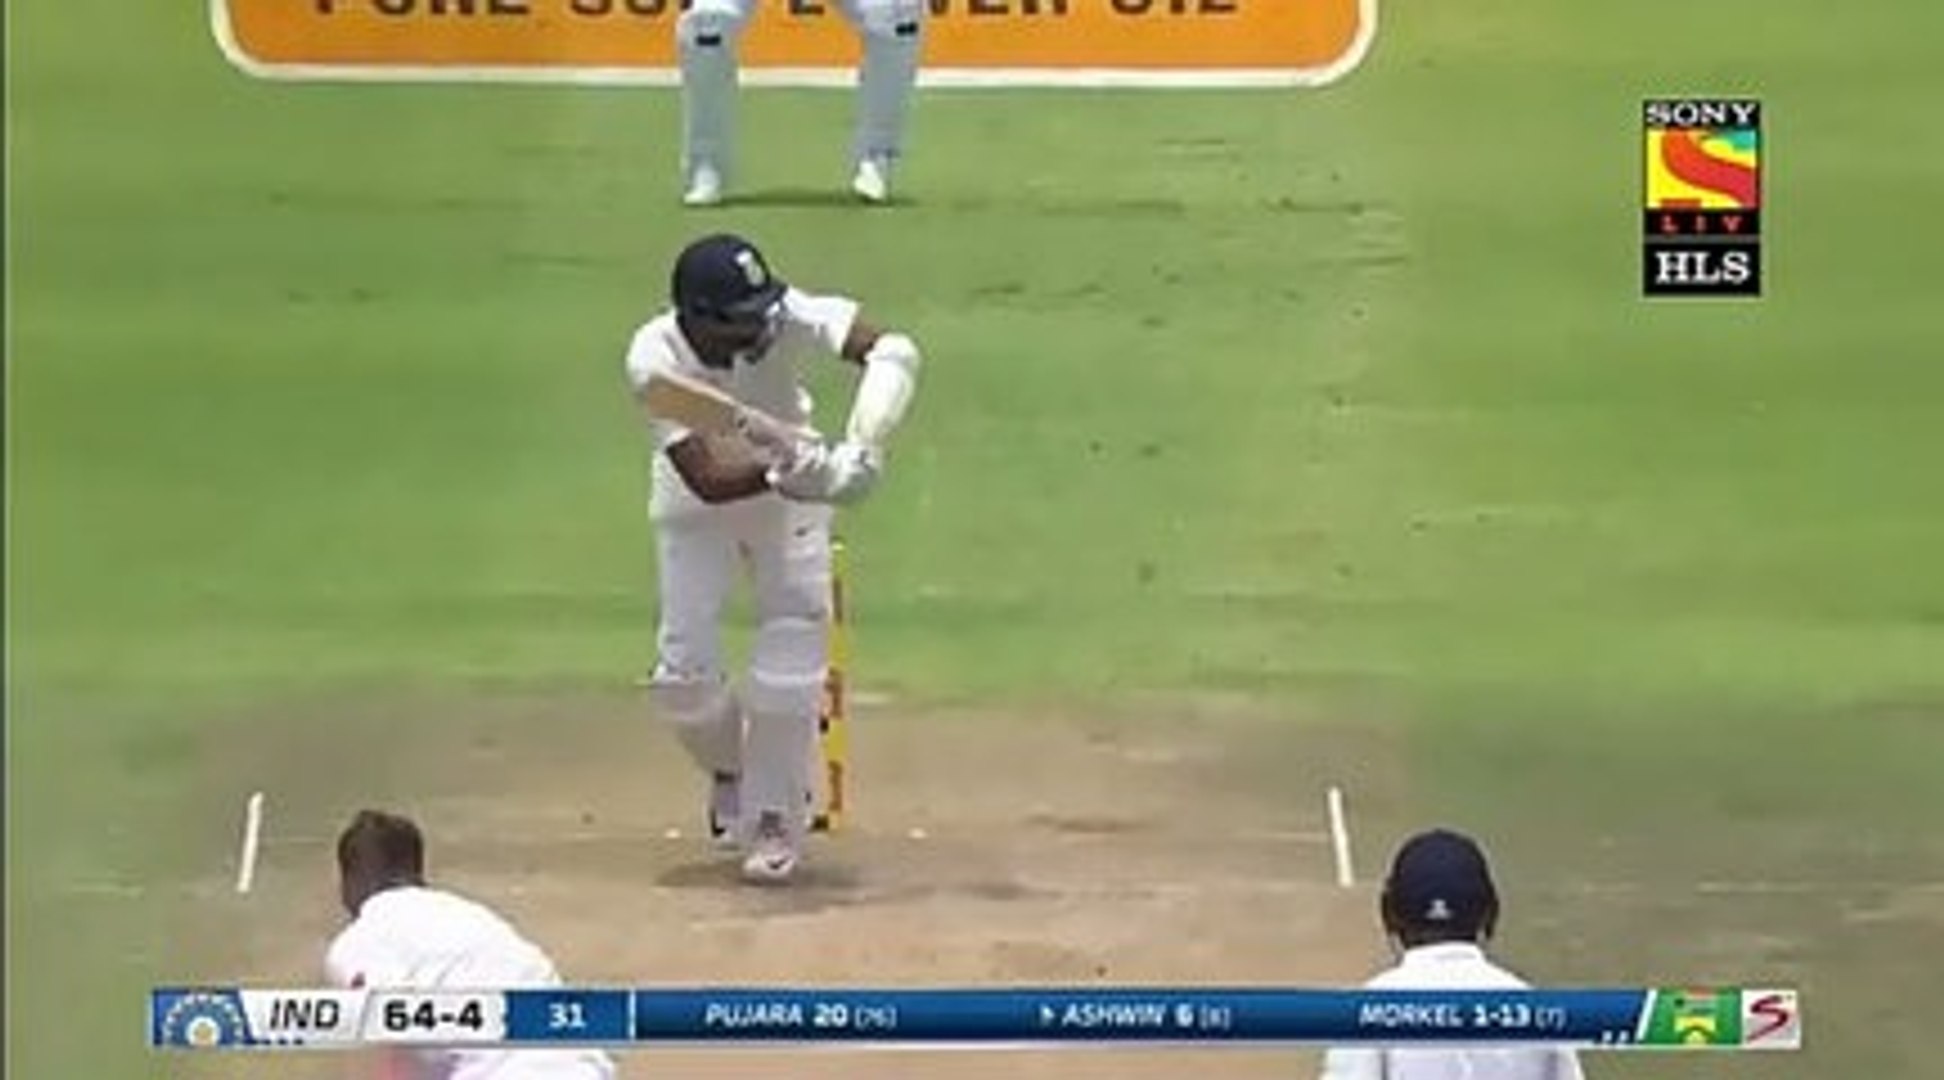 india vs south africa 2nd Test day 4 highlights 2018 - video Dailymotion